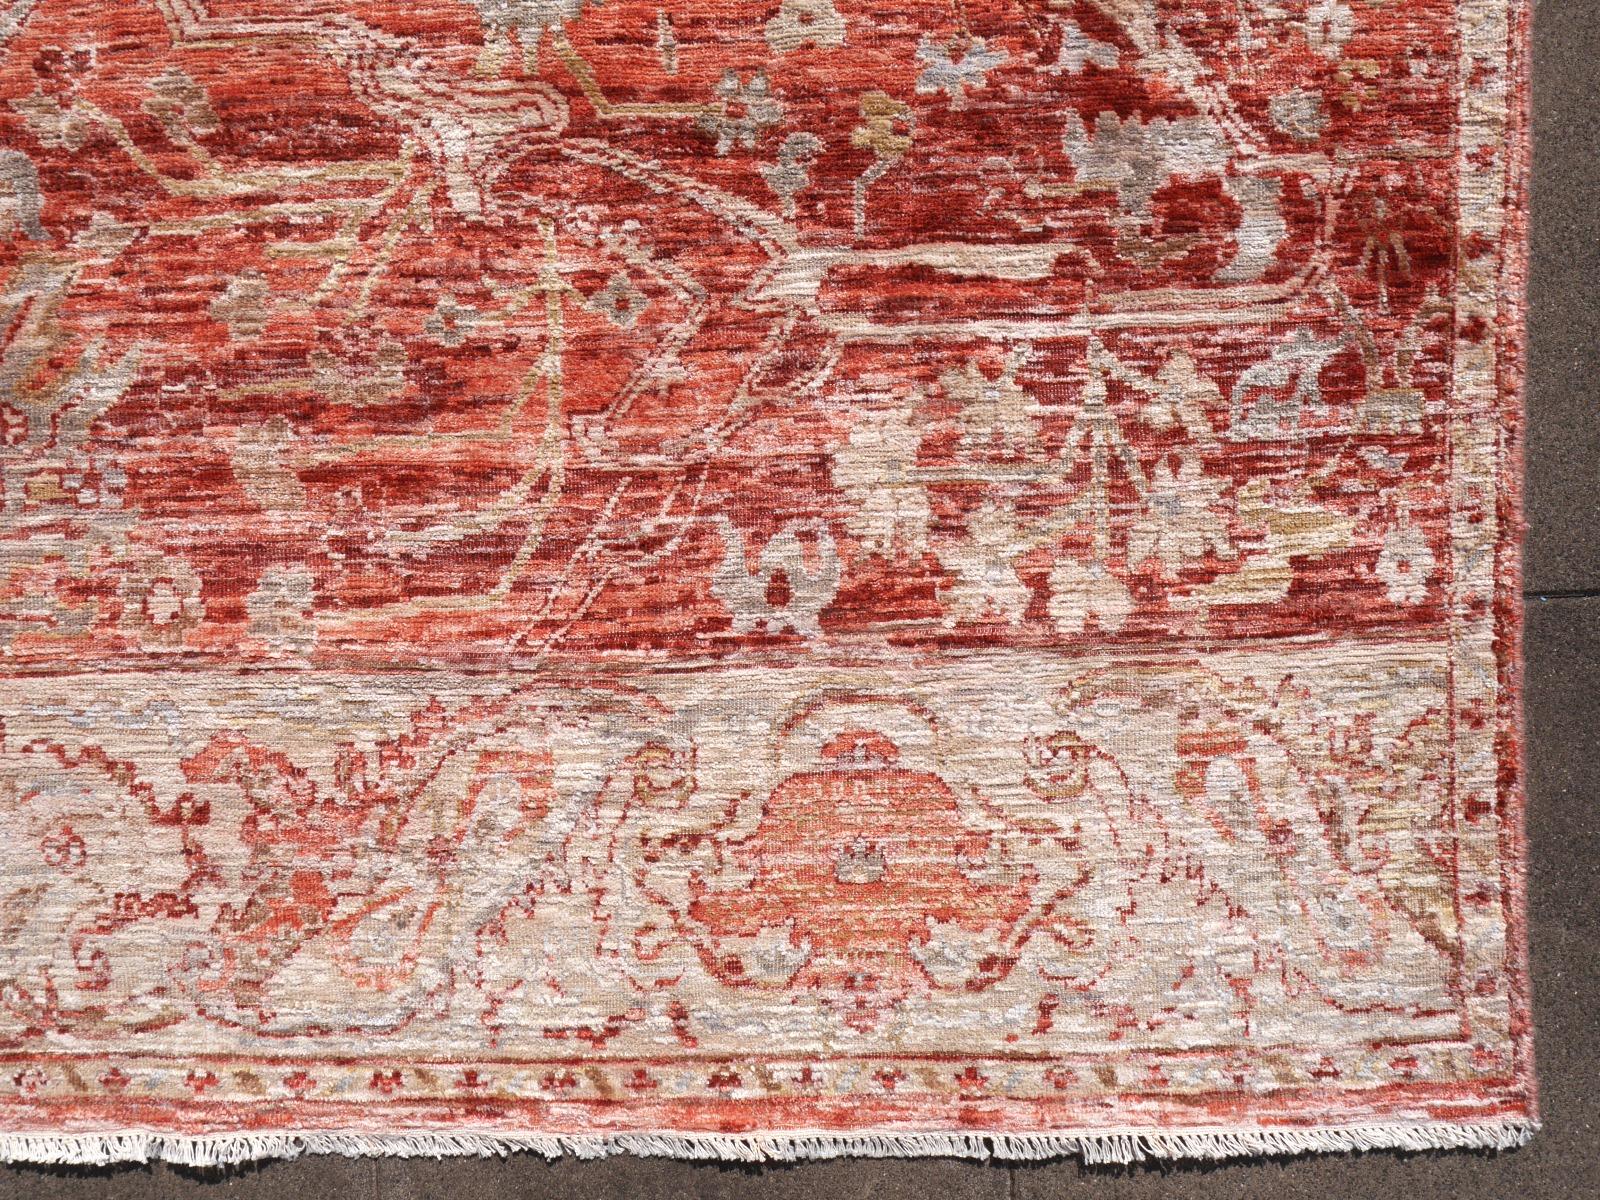 Modern Rug Hand Knotted in Style of Heriz Serapi or Antique Sultanabad 4